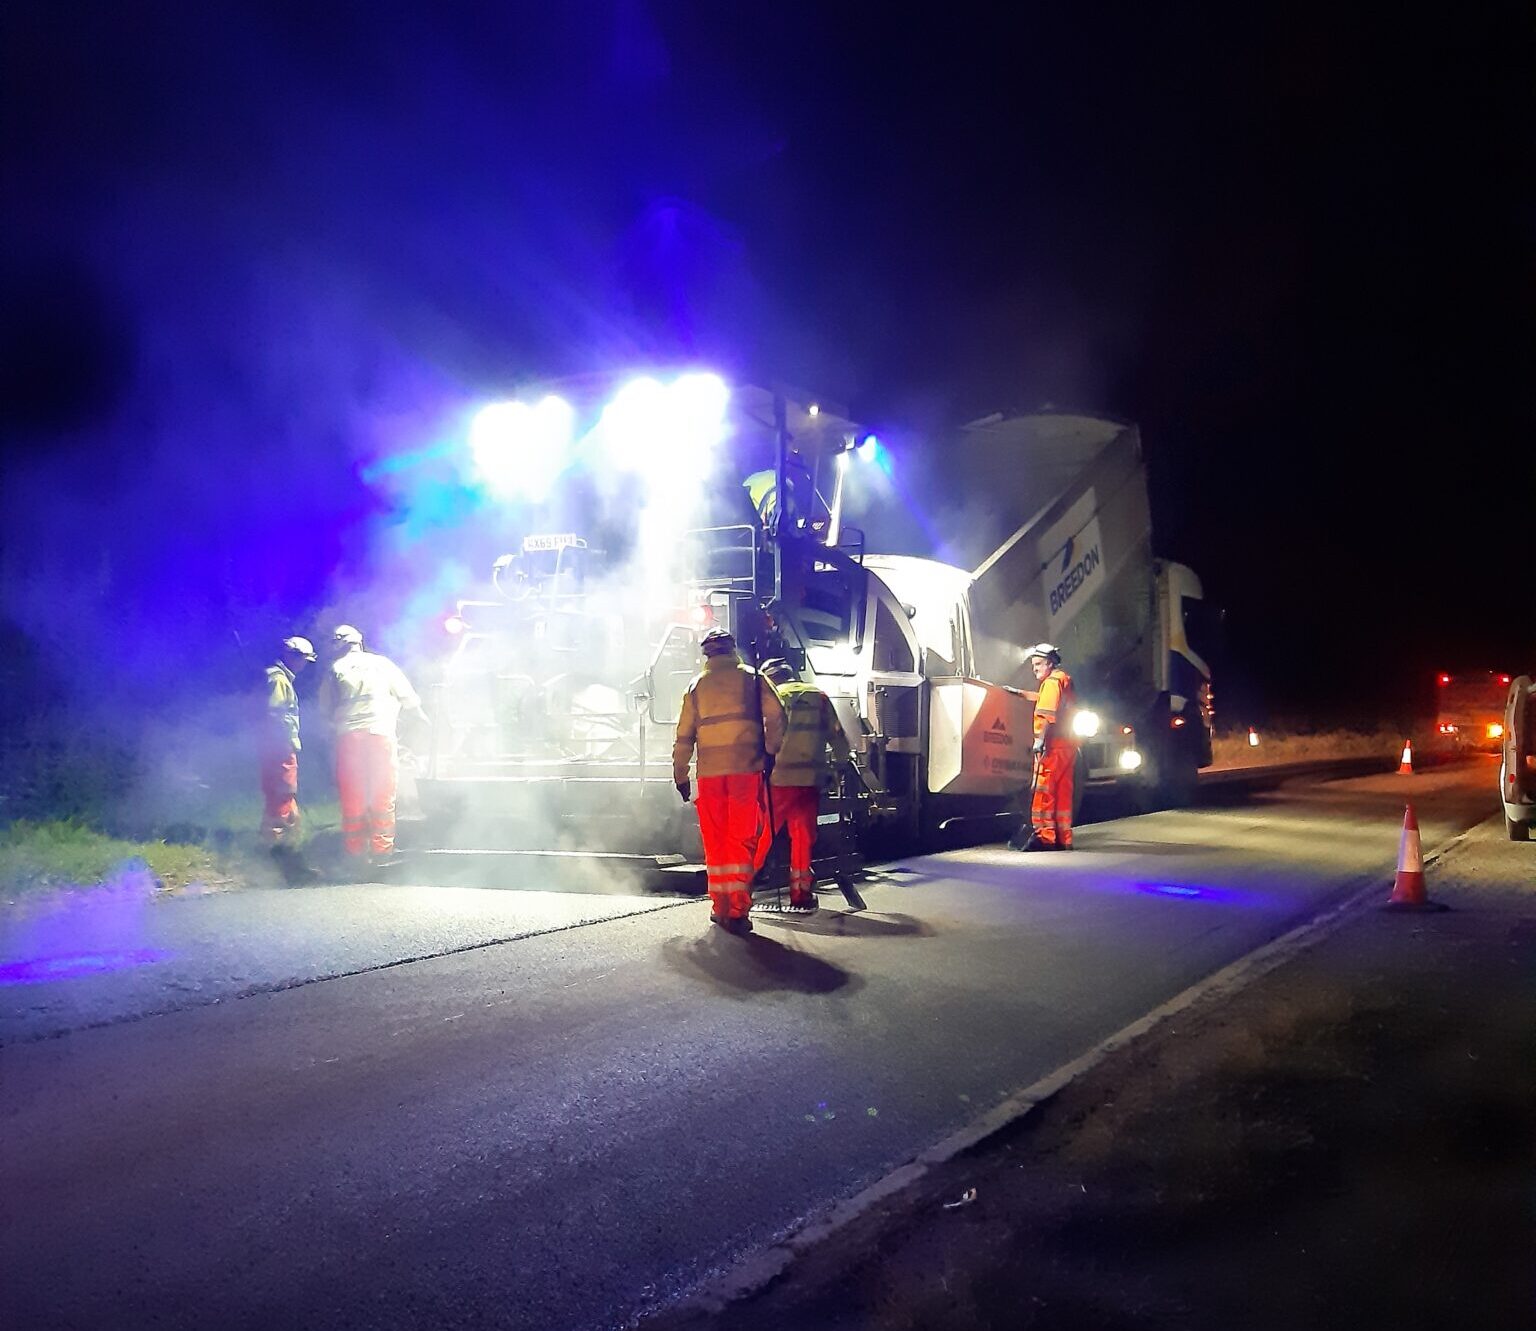 OVERNIGHT RESURFACING FOR THE A87 KYLEAKIN ROUNDABOUT